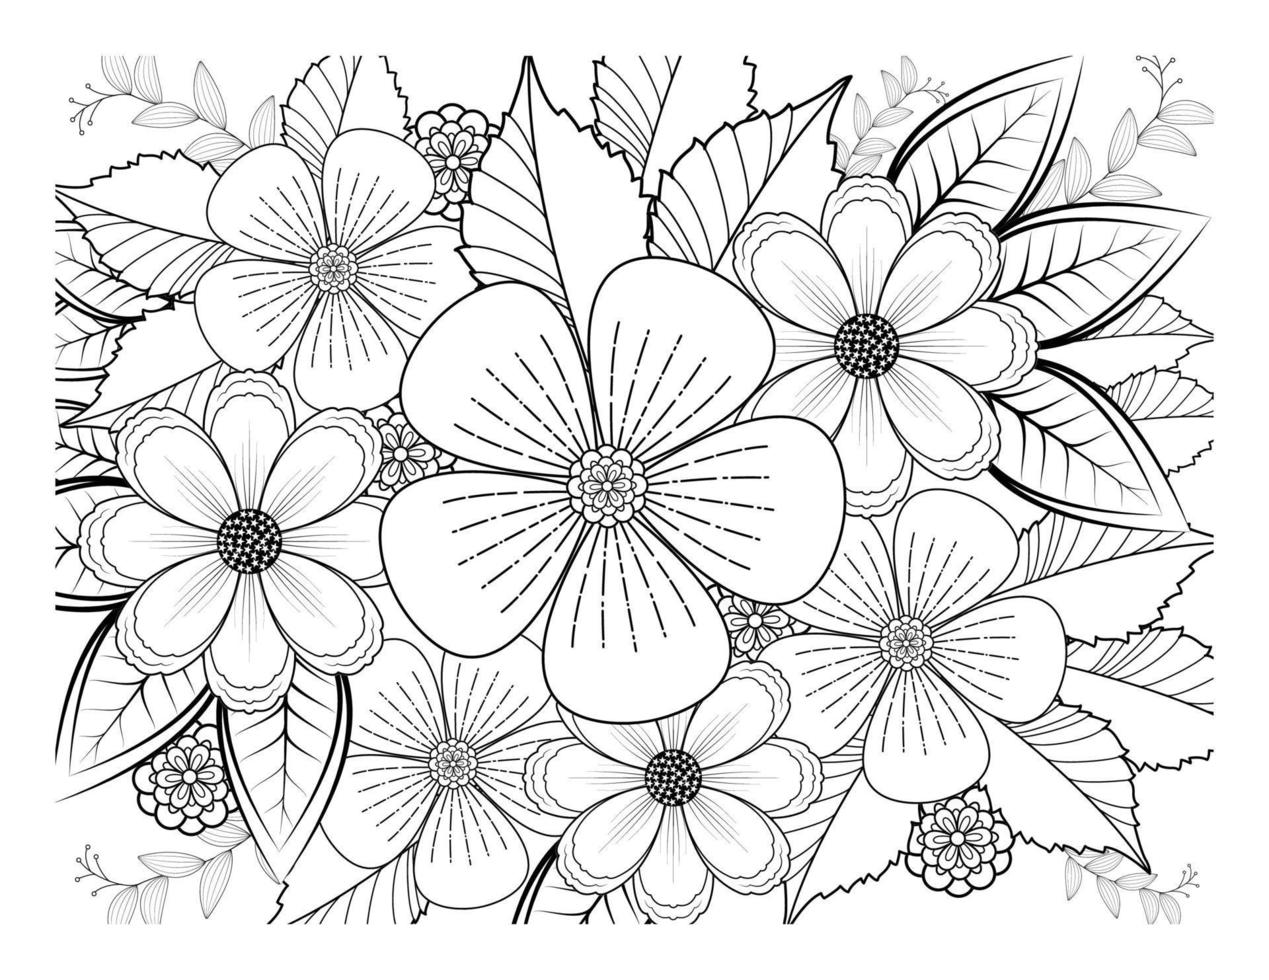 Coloring book for adult and older children. Coloring page with flowers pattern fram vector